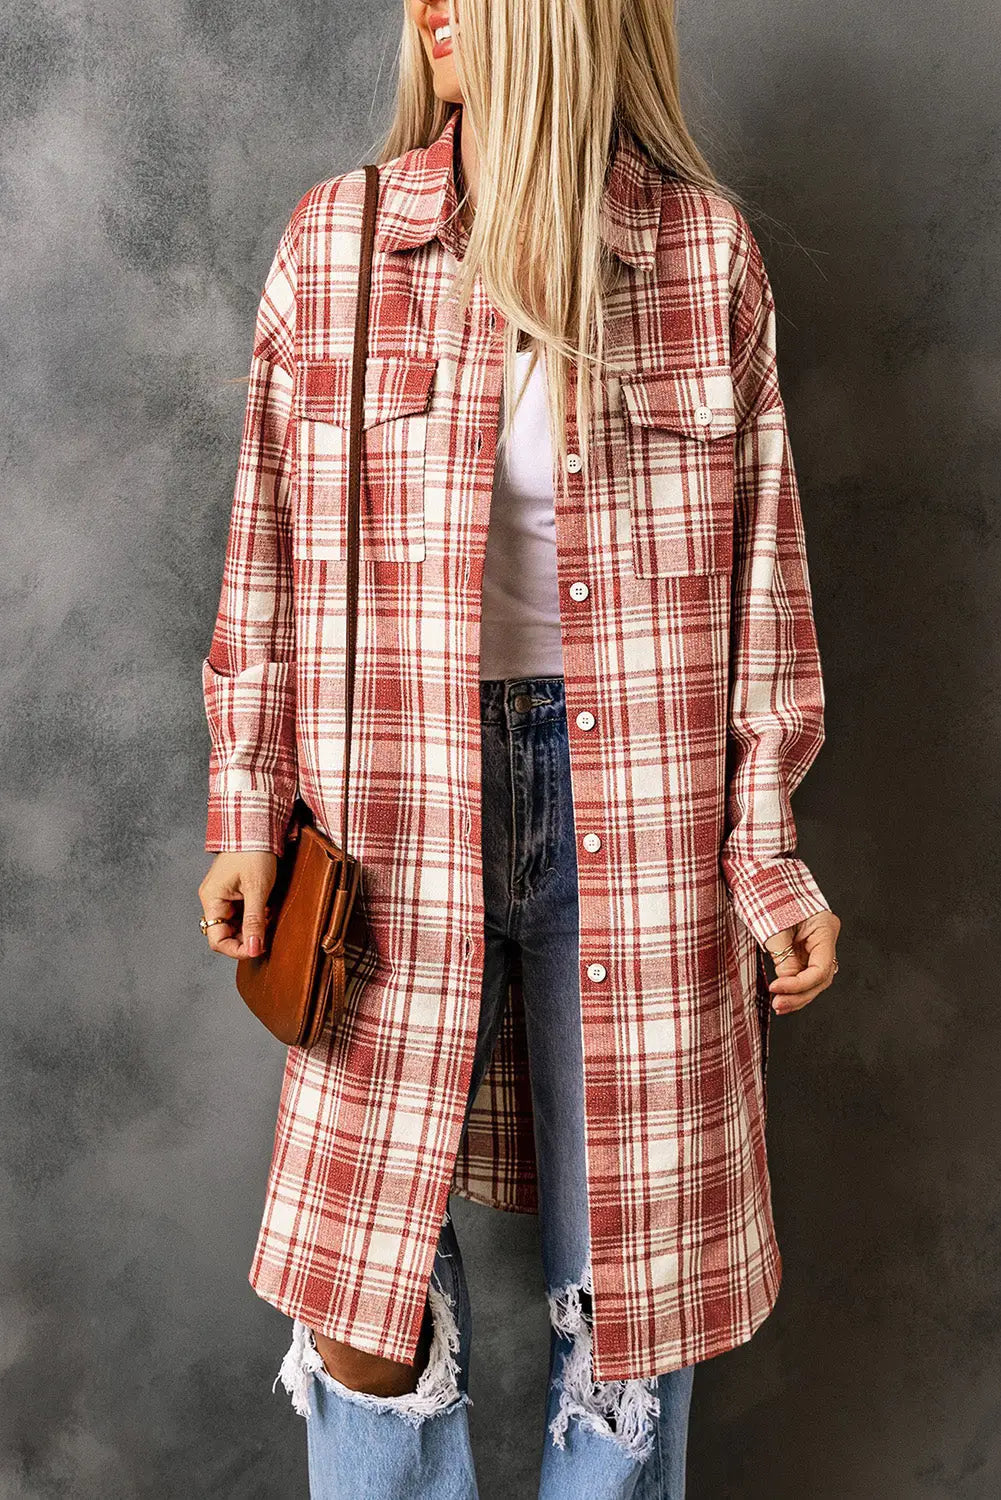 Red plaid print button long shacket - s / 65% polyester + 35% cotton - outerwear